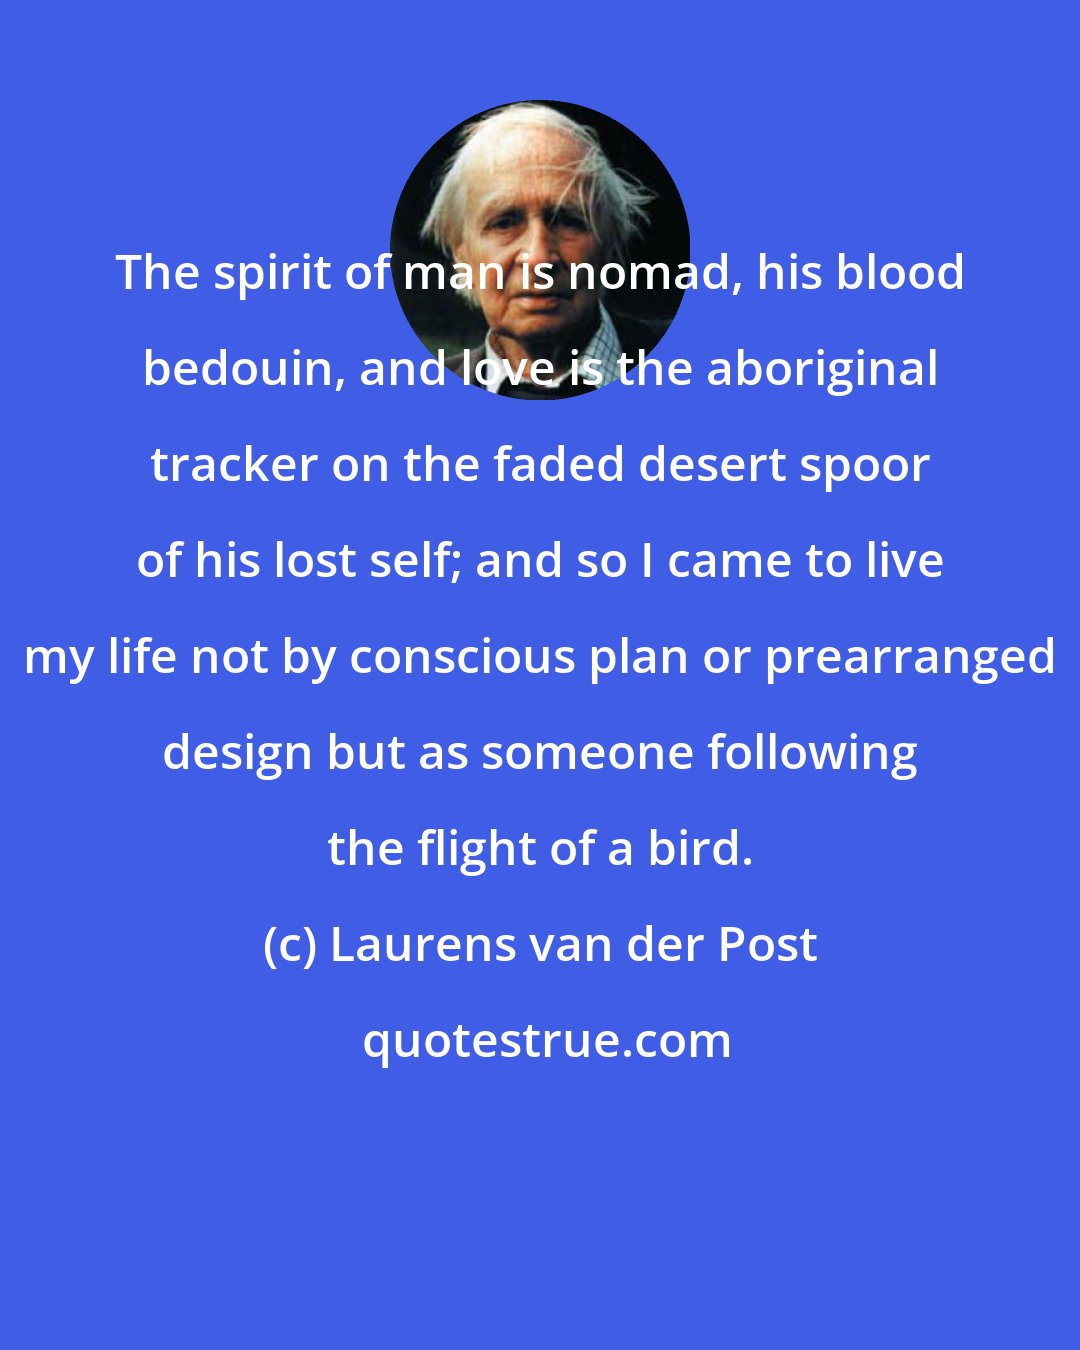 Laurens van der Post: The spirit of man is nomad, his blood bedouin, and love is the aboriginal tracker on the faded desert spoor of his lost self; and so I came to live my life not by conscious plan or prearranged design but as someone following the flight of a bird.